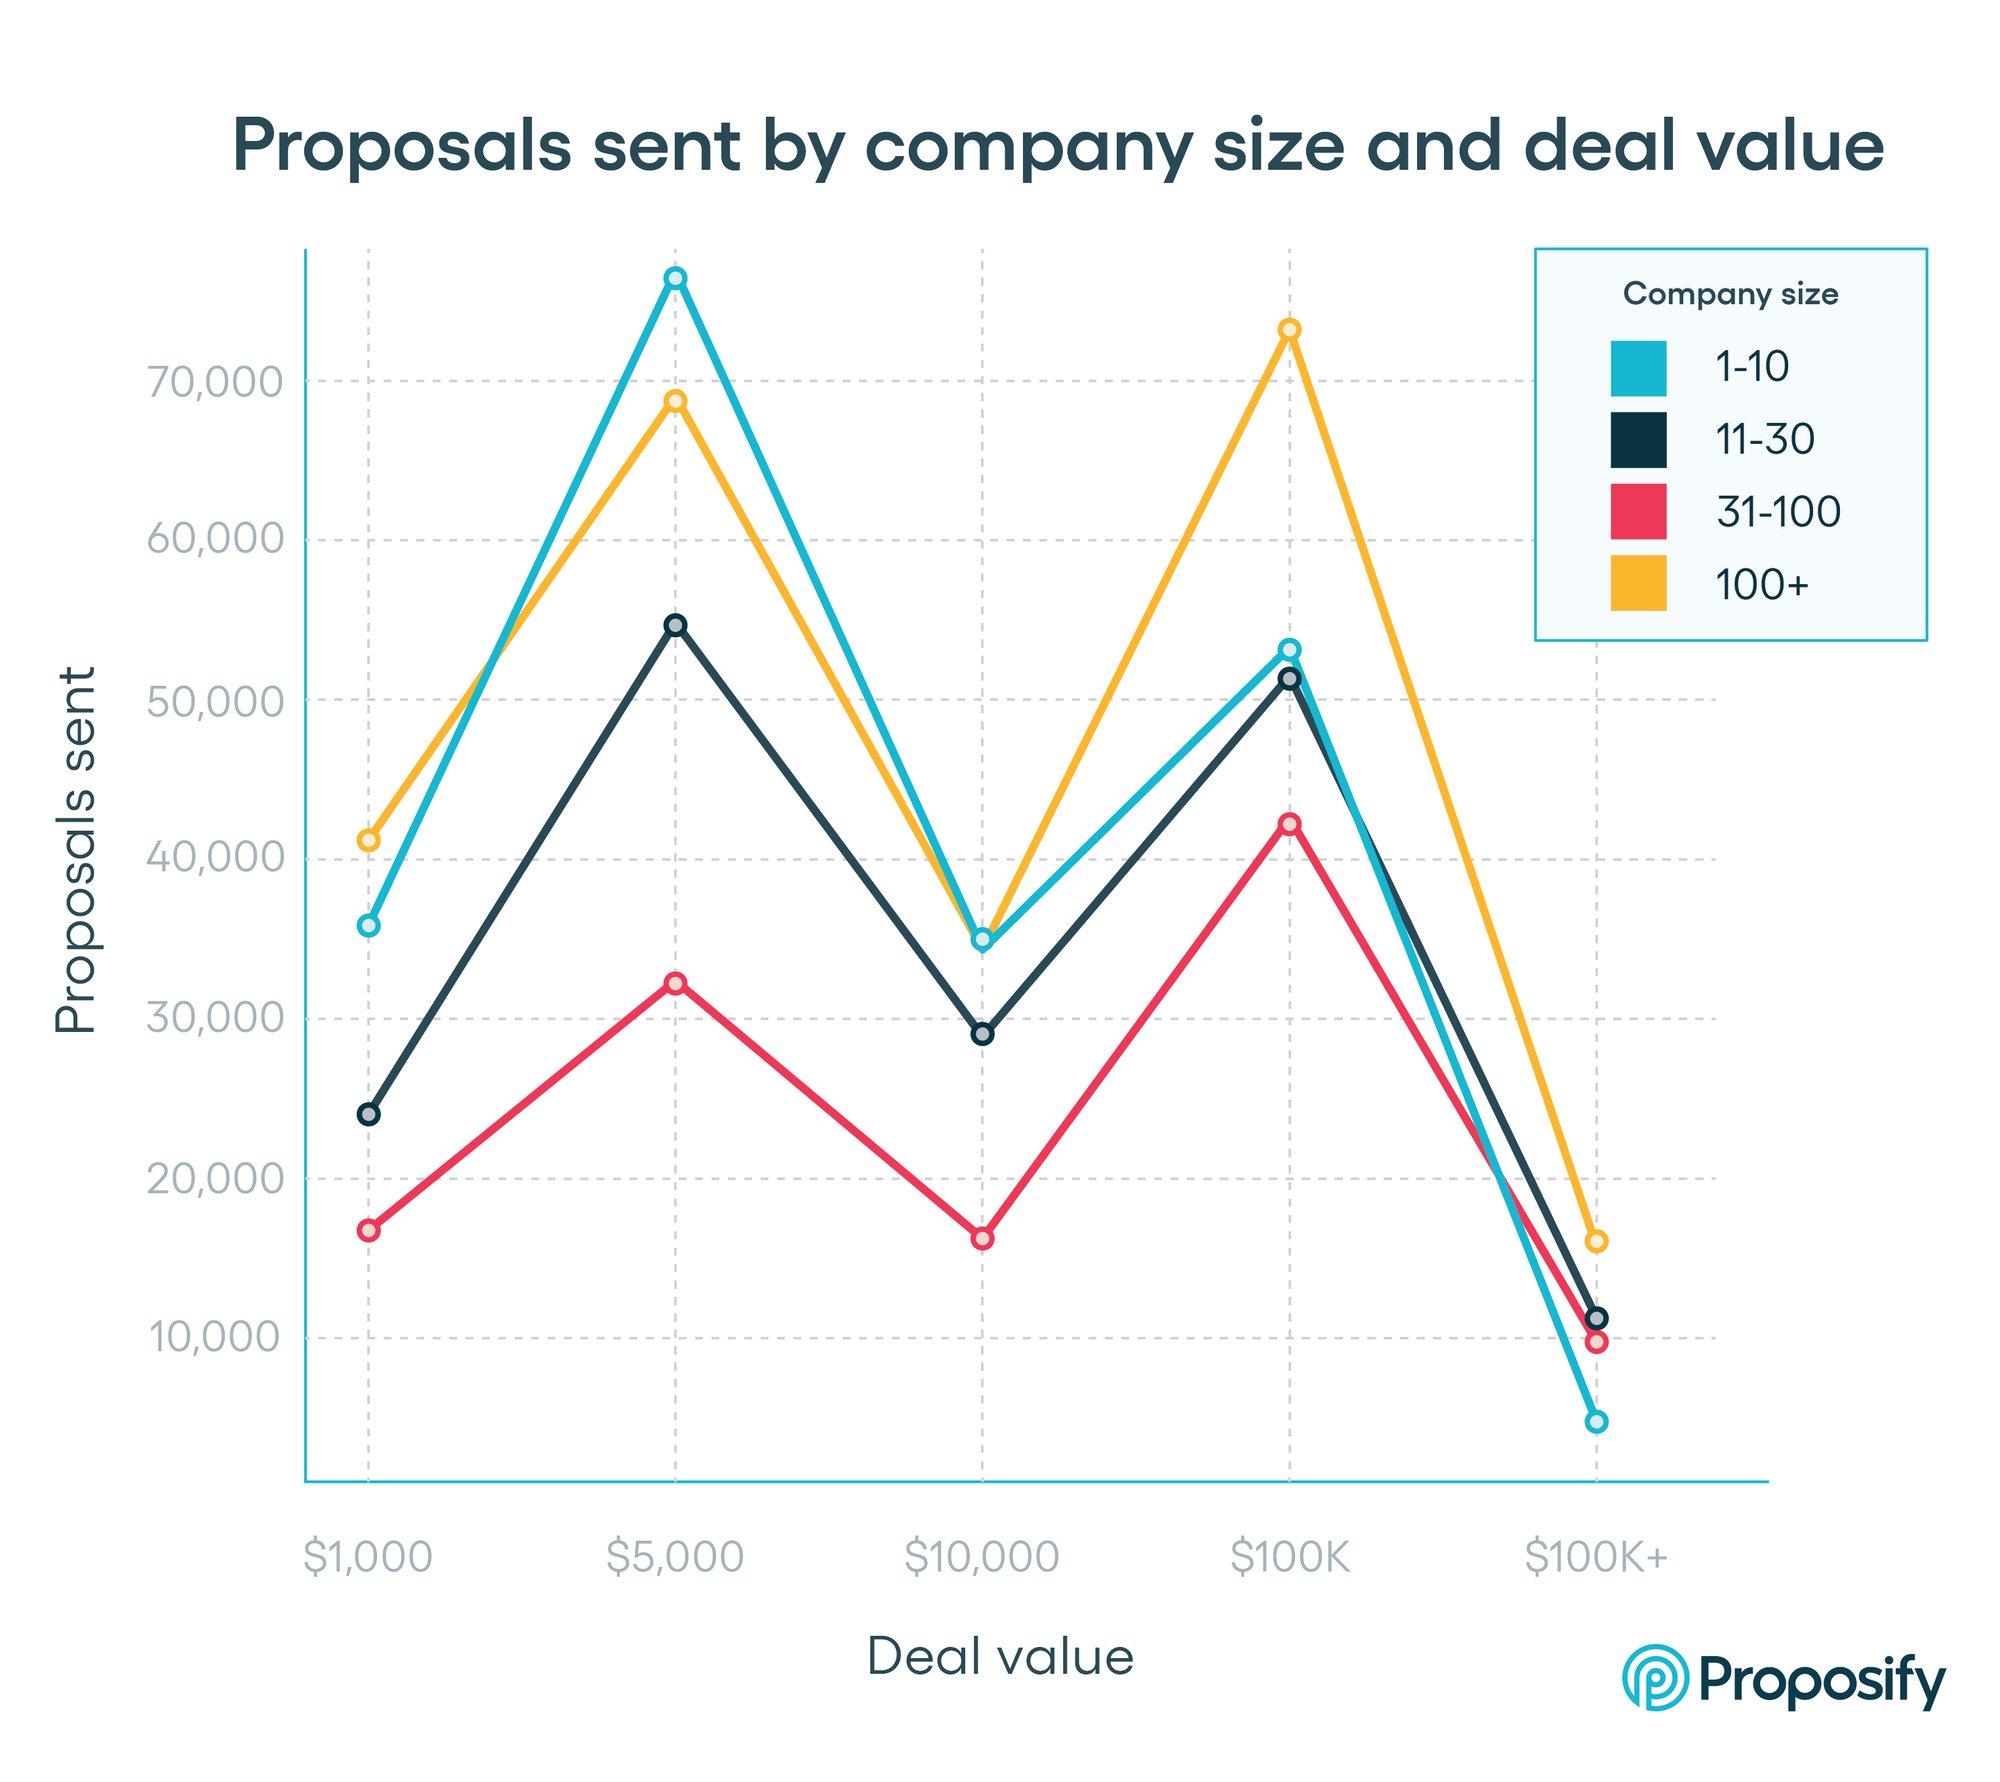 Proposals sent by company size